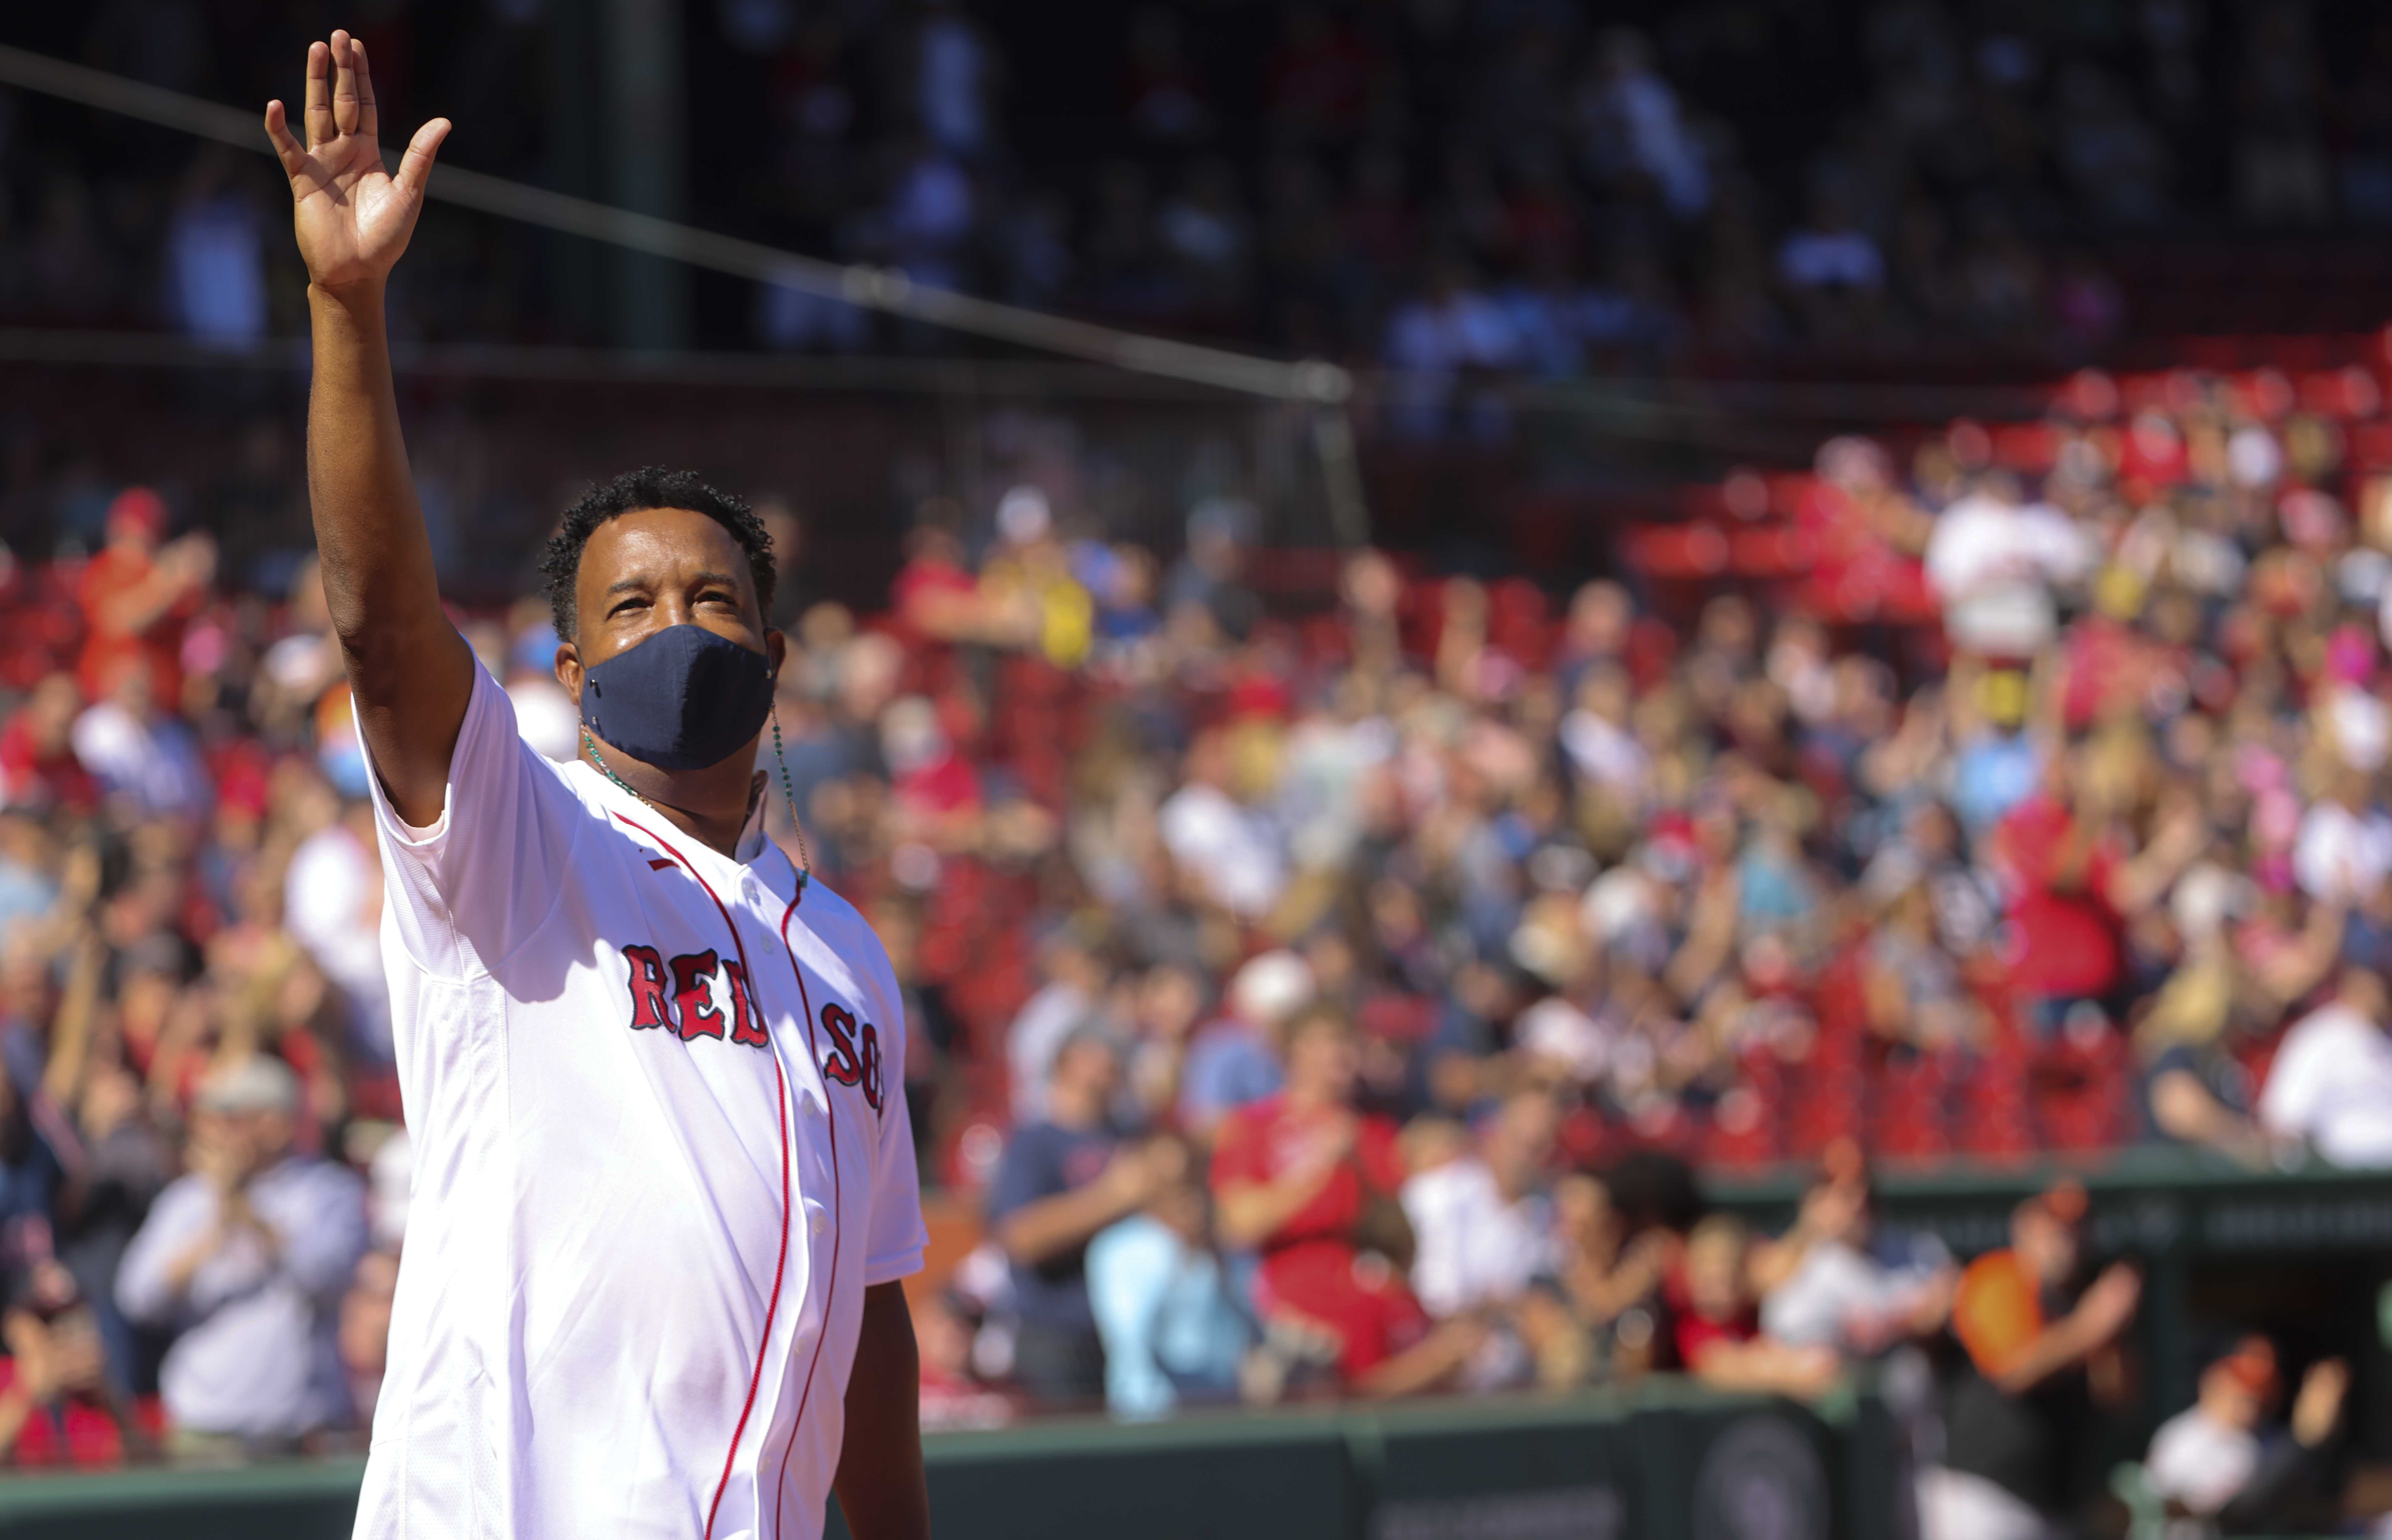 Pedro Martinez thinks it would be a mistake for Xander Bogaerts to